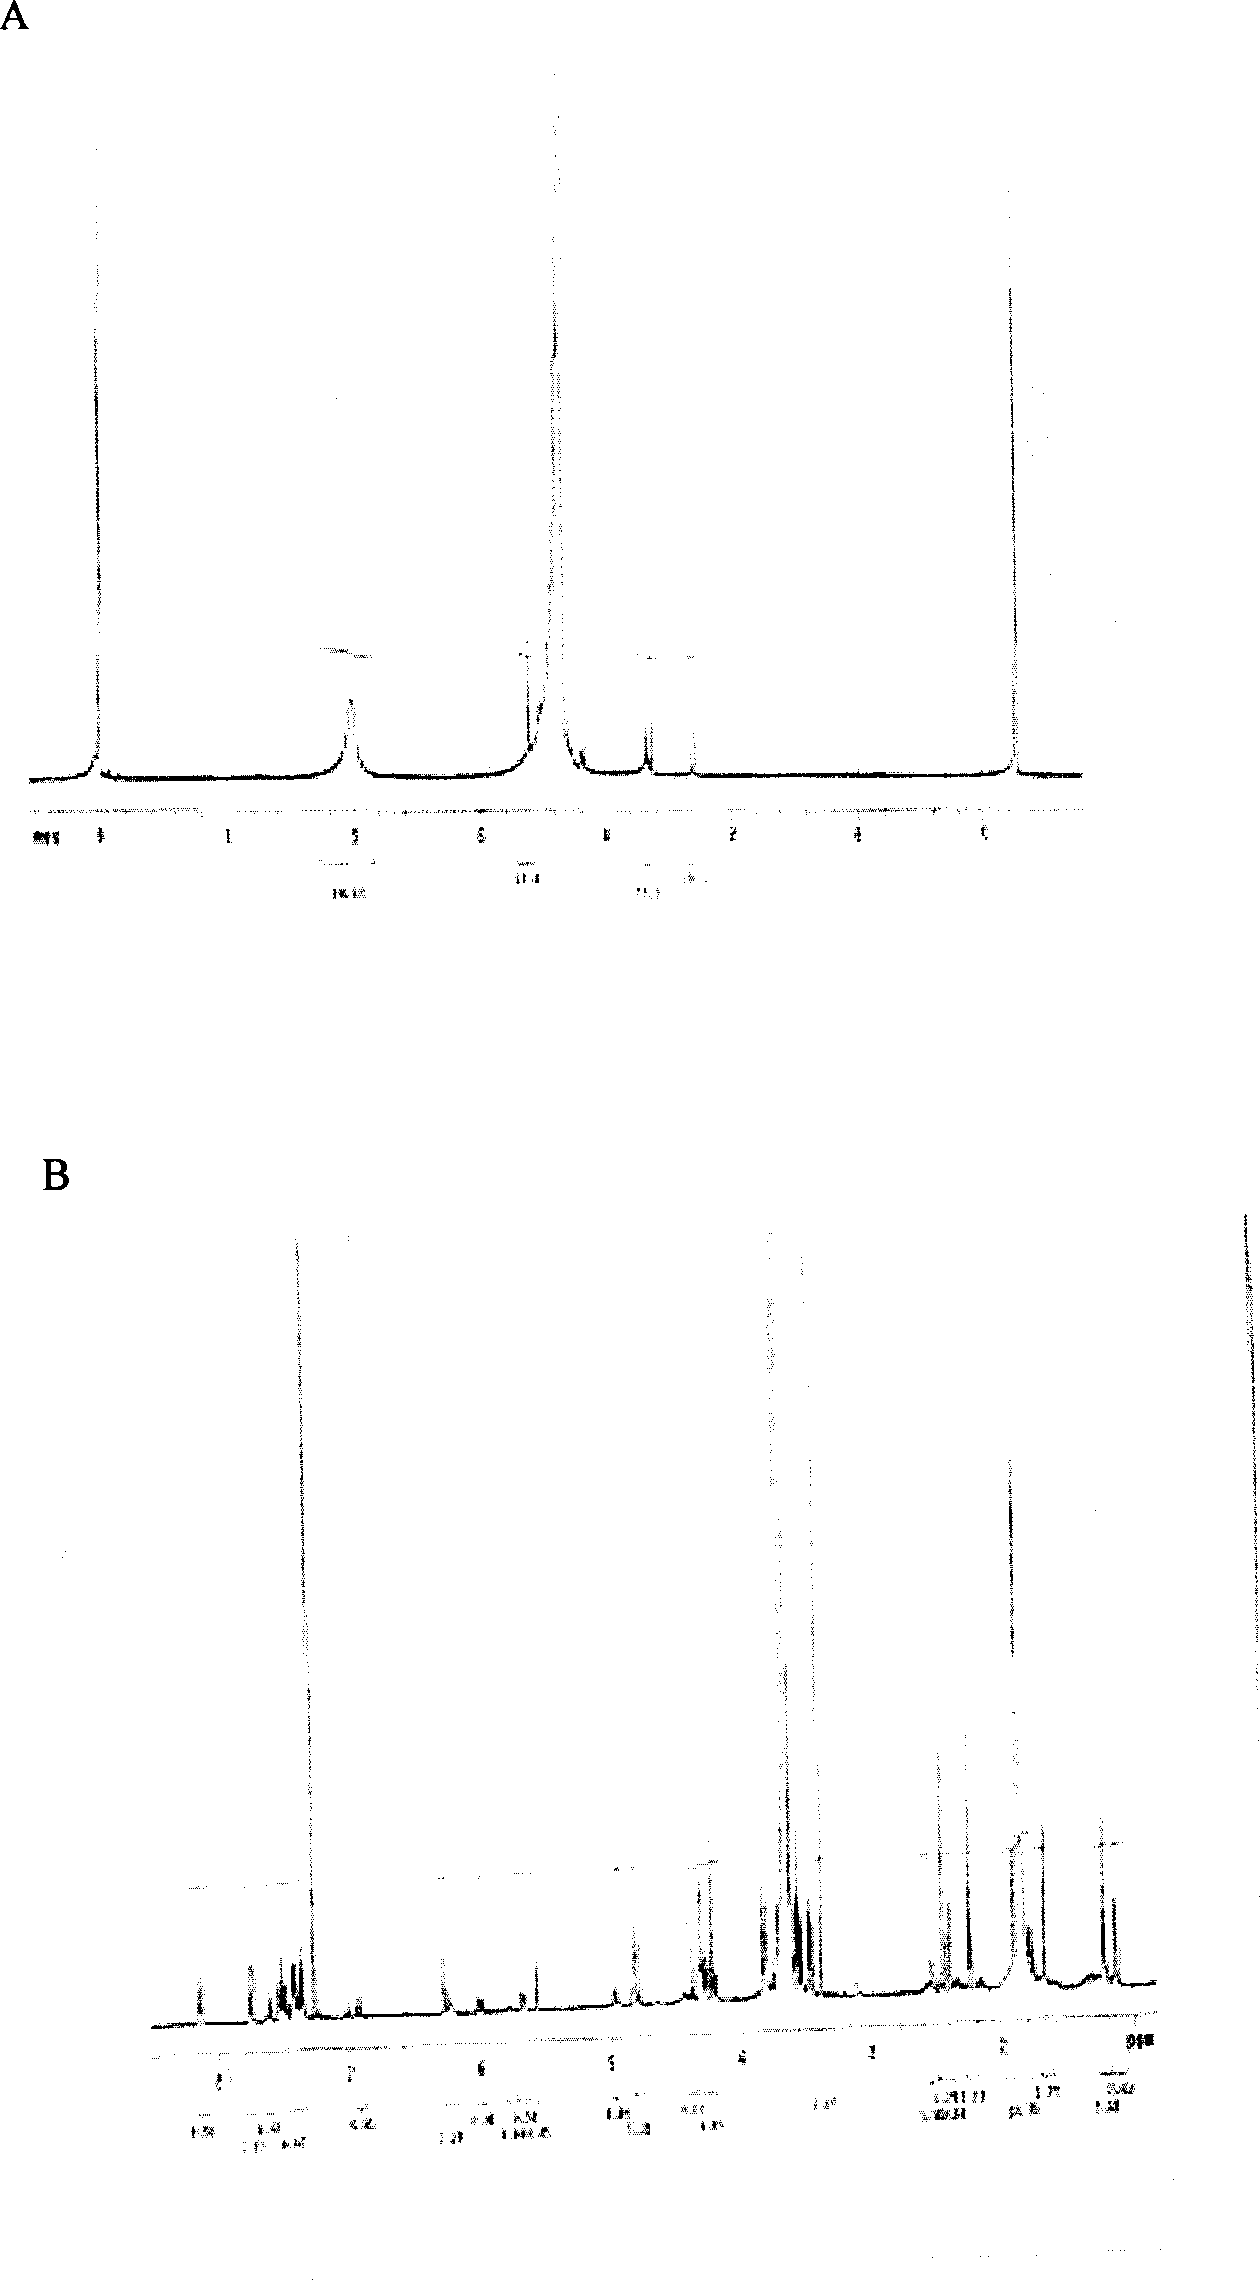 Prodrug of taxol or polyene-taxol with carbowax as carrier